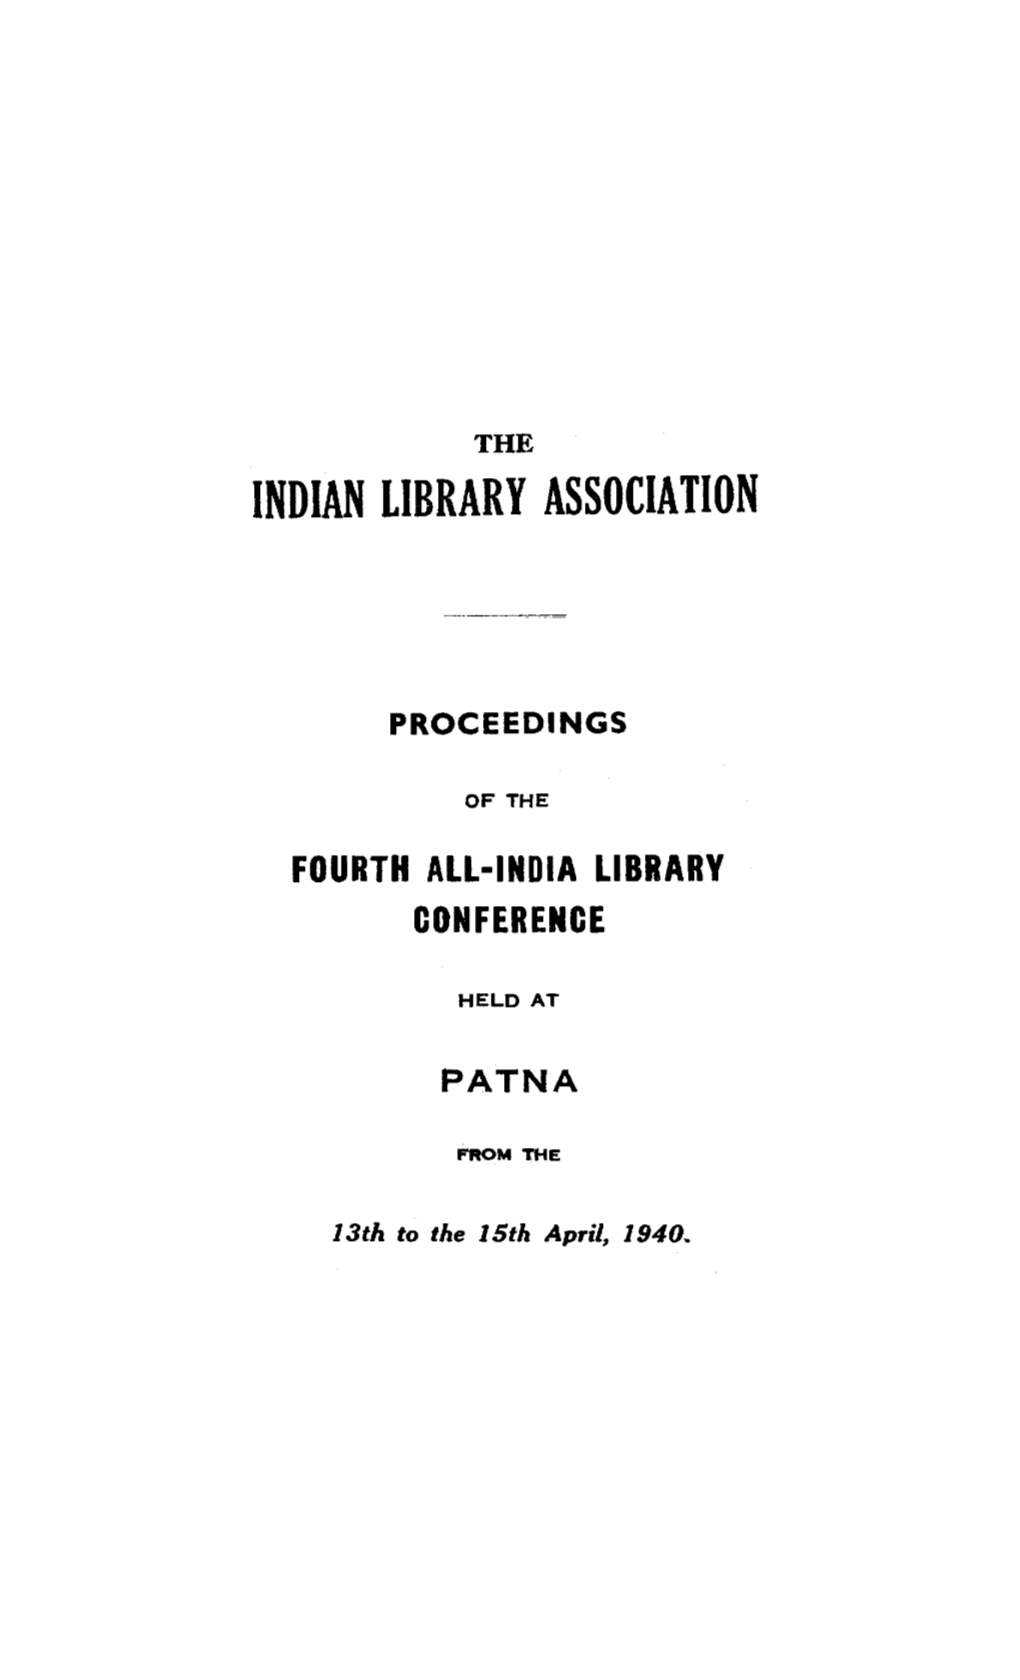 Indian Library Association